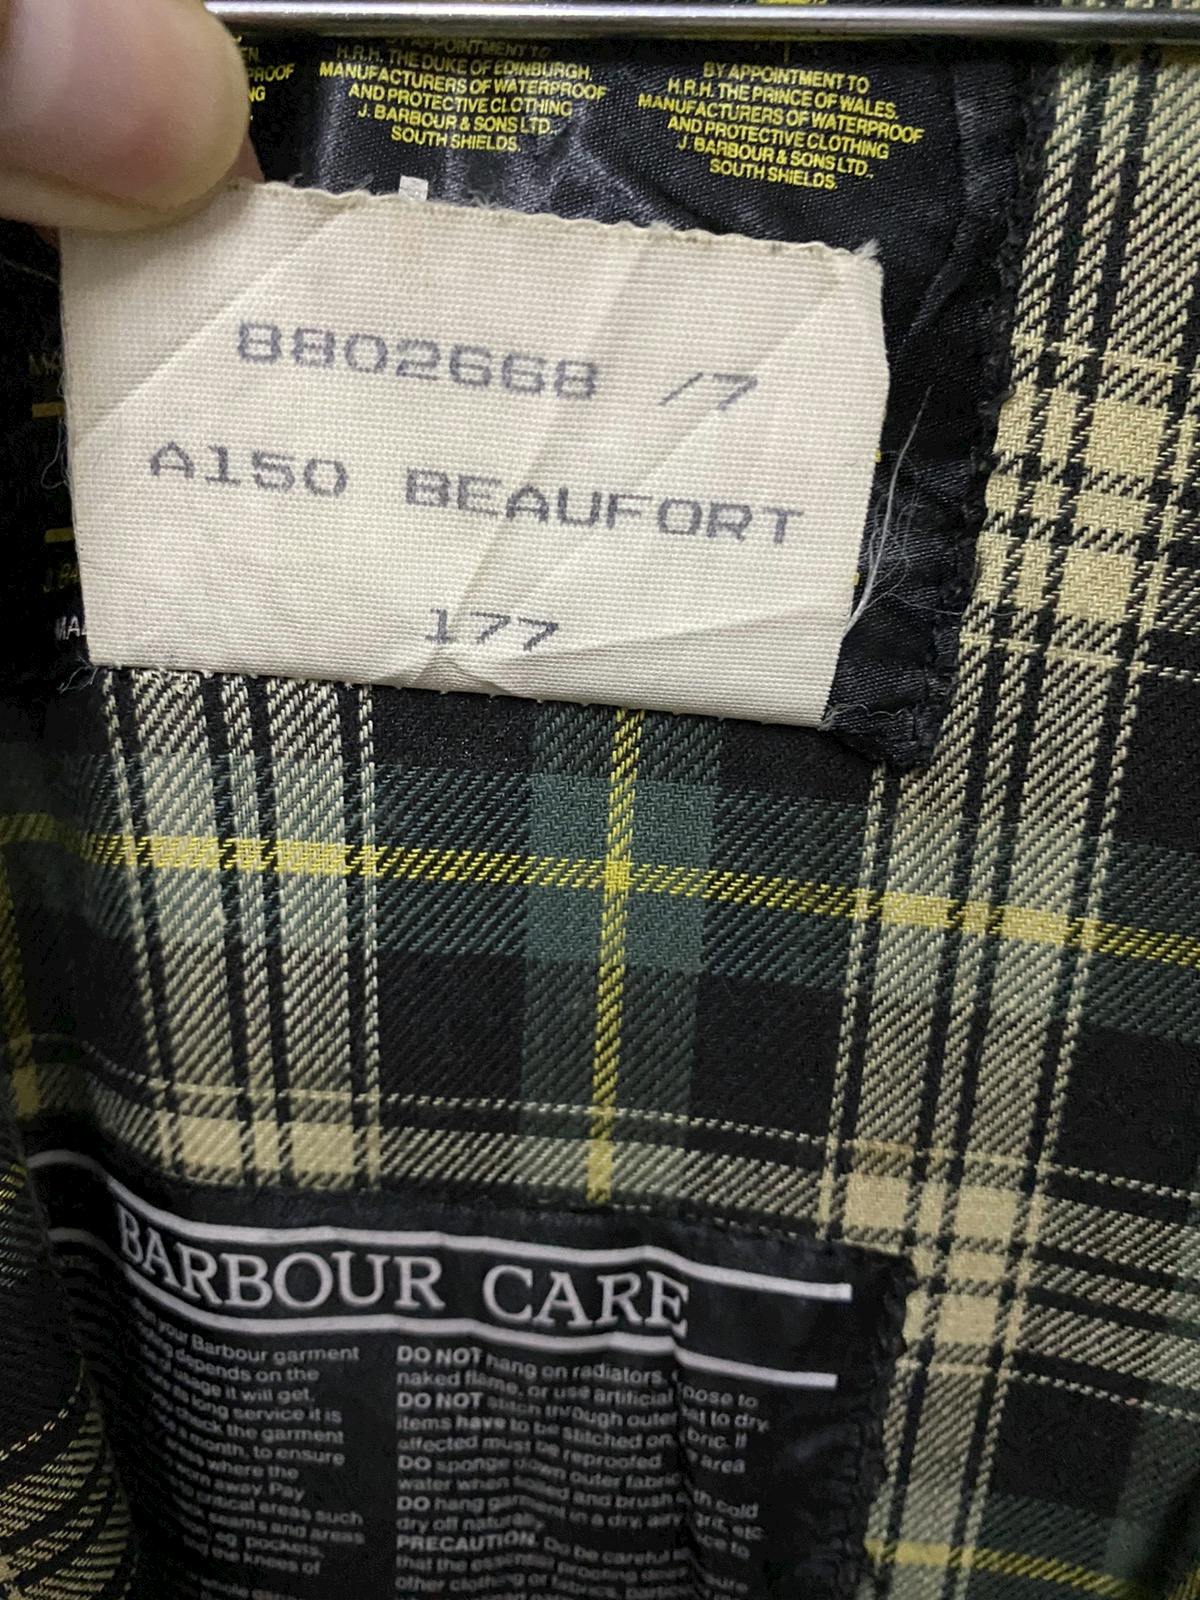 Vintage Barbour A150 Beaufort Wax Jacket Made in England - 11